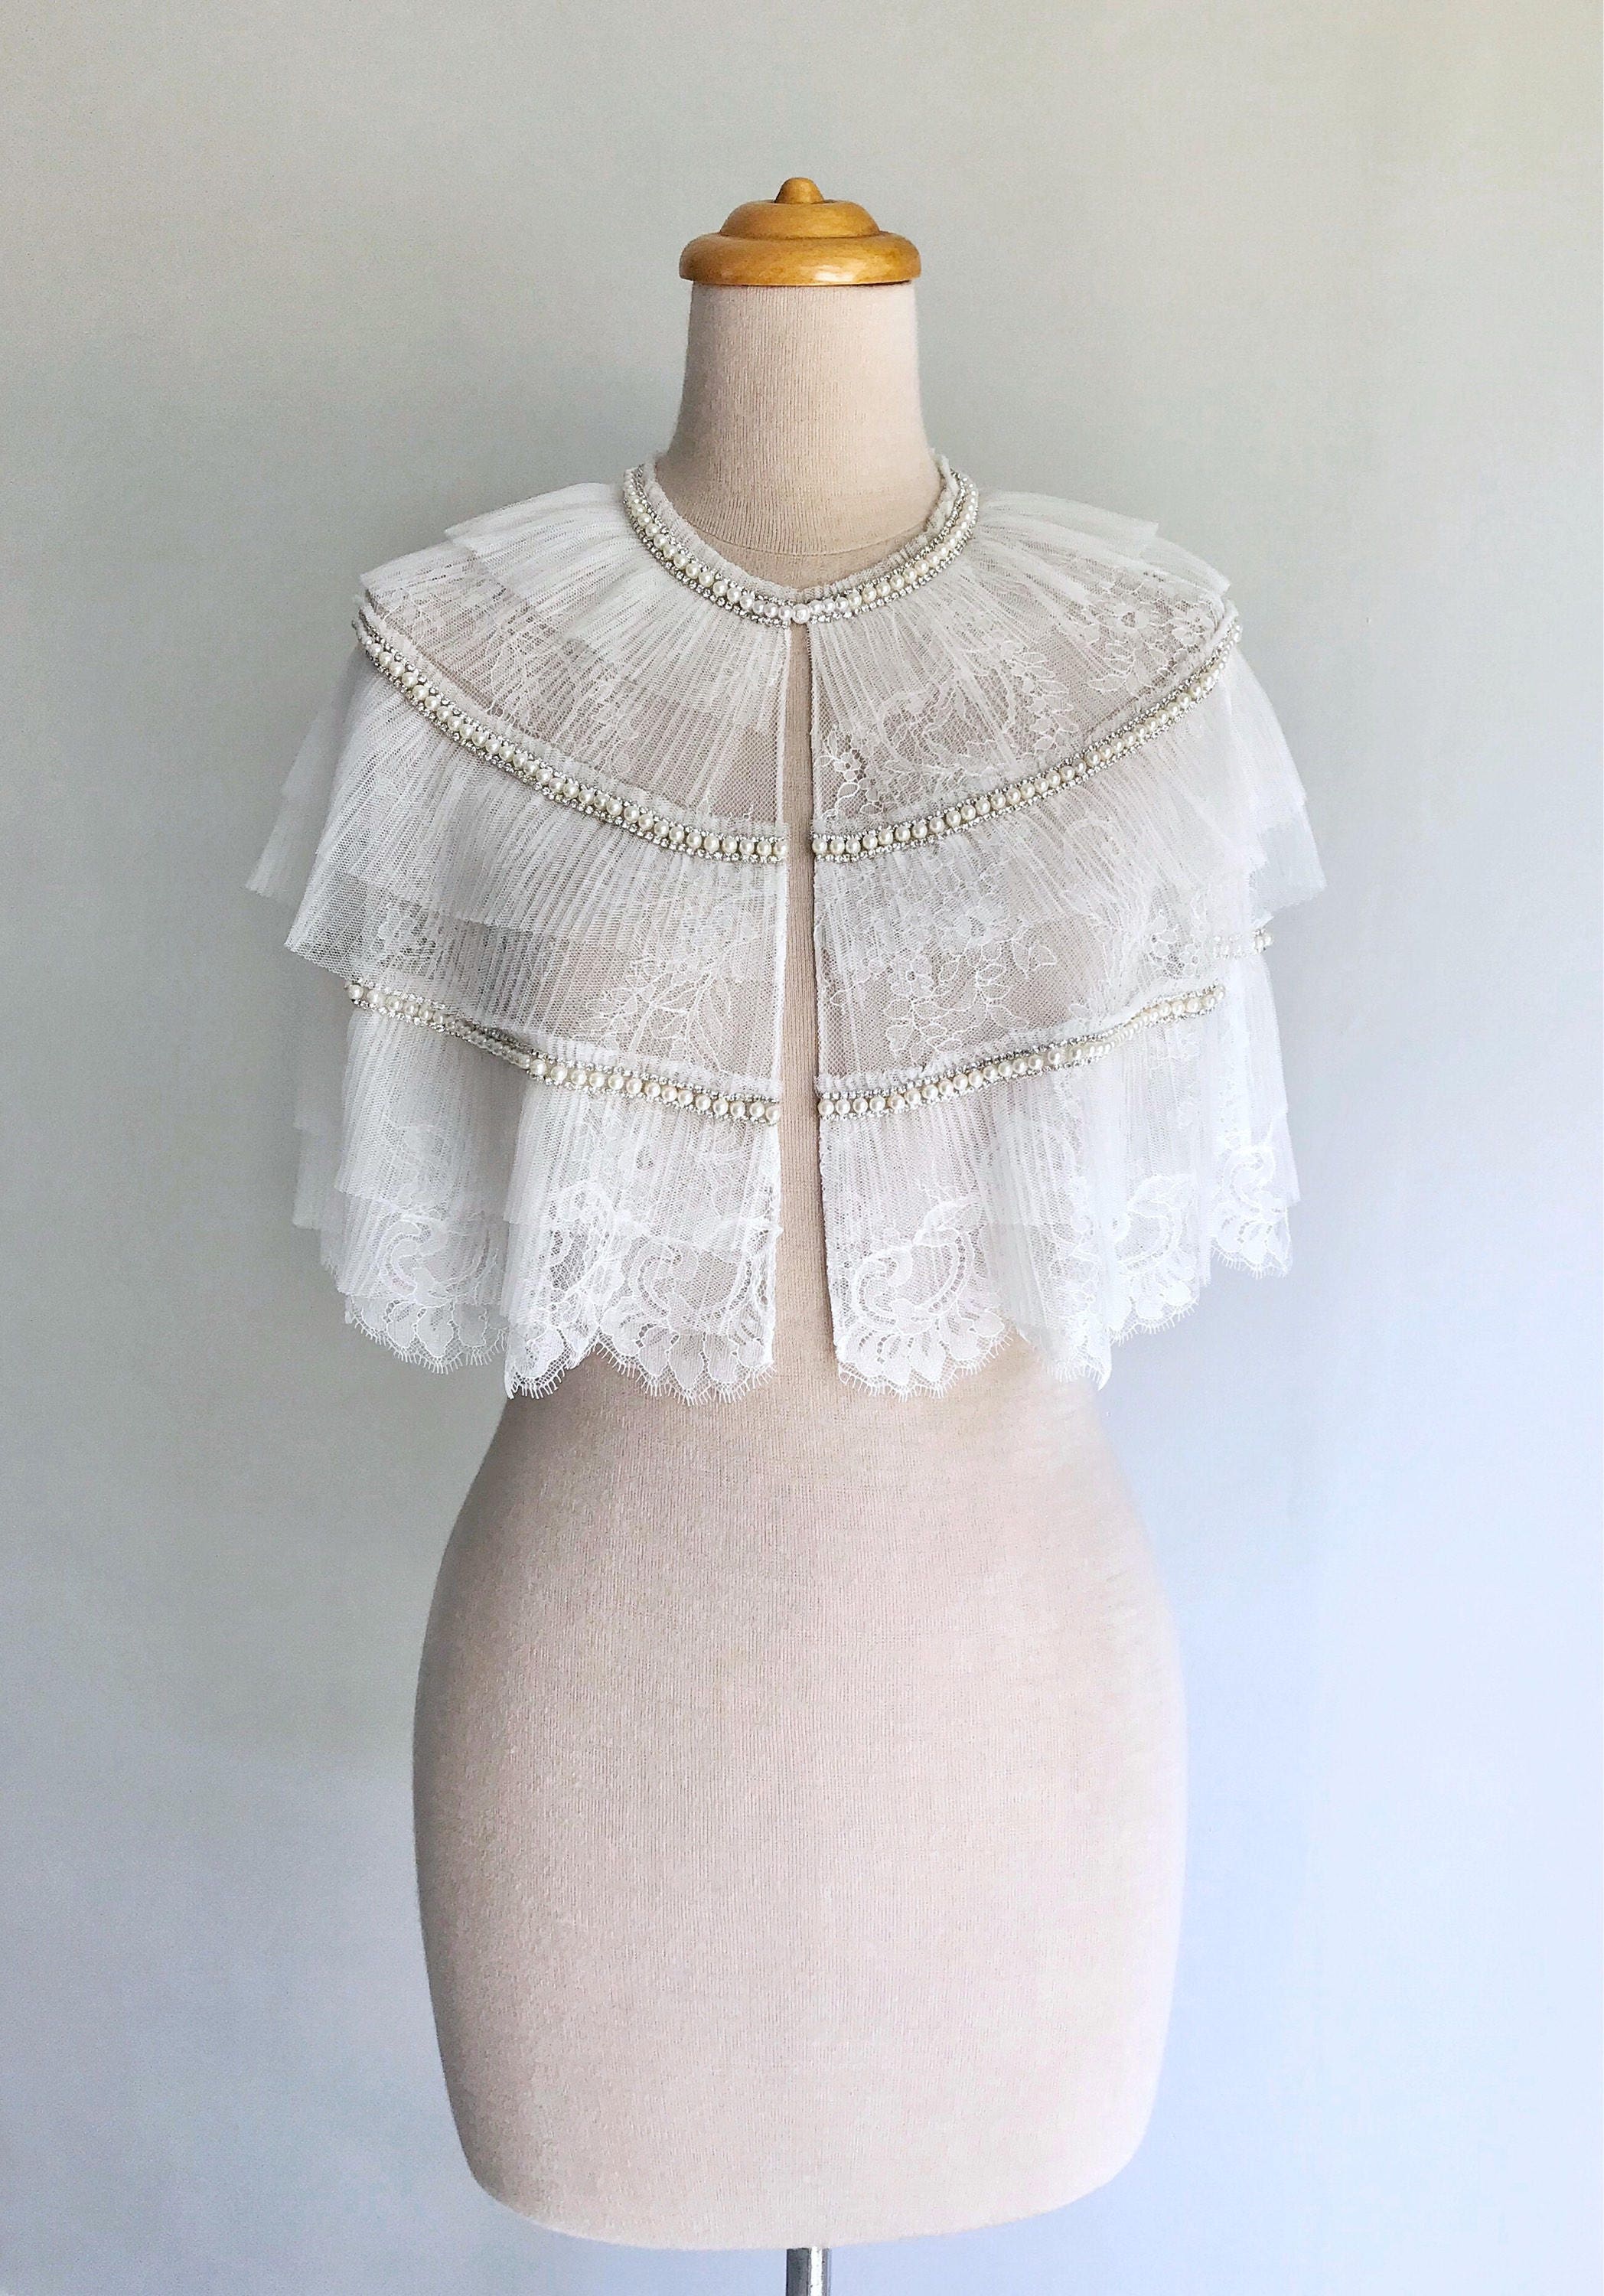 Modern Lace Cape Short lace capelet for a wedding dress by Davie and Chiyo  #commissionlink #wedding #wed…